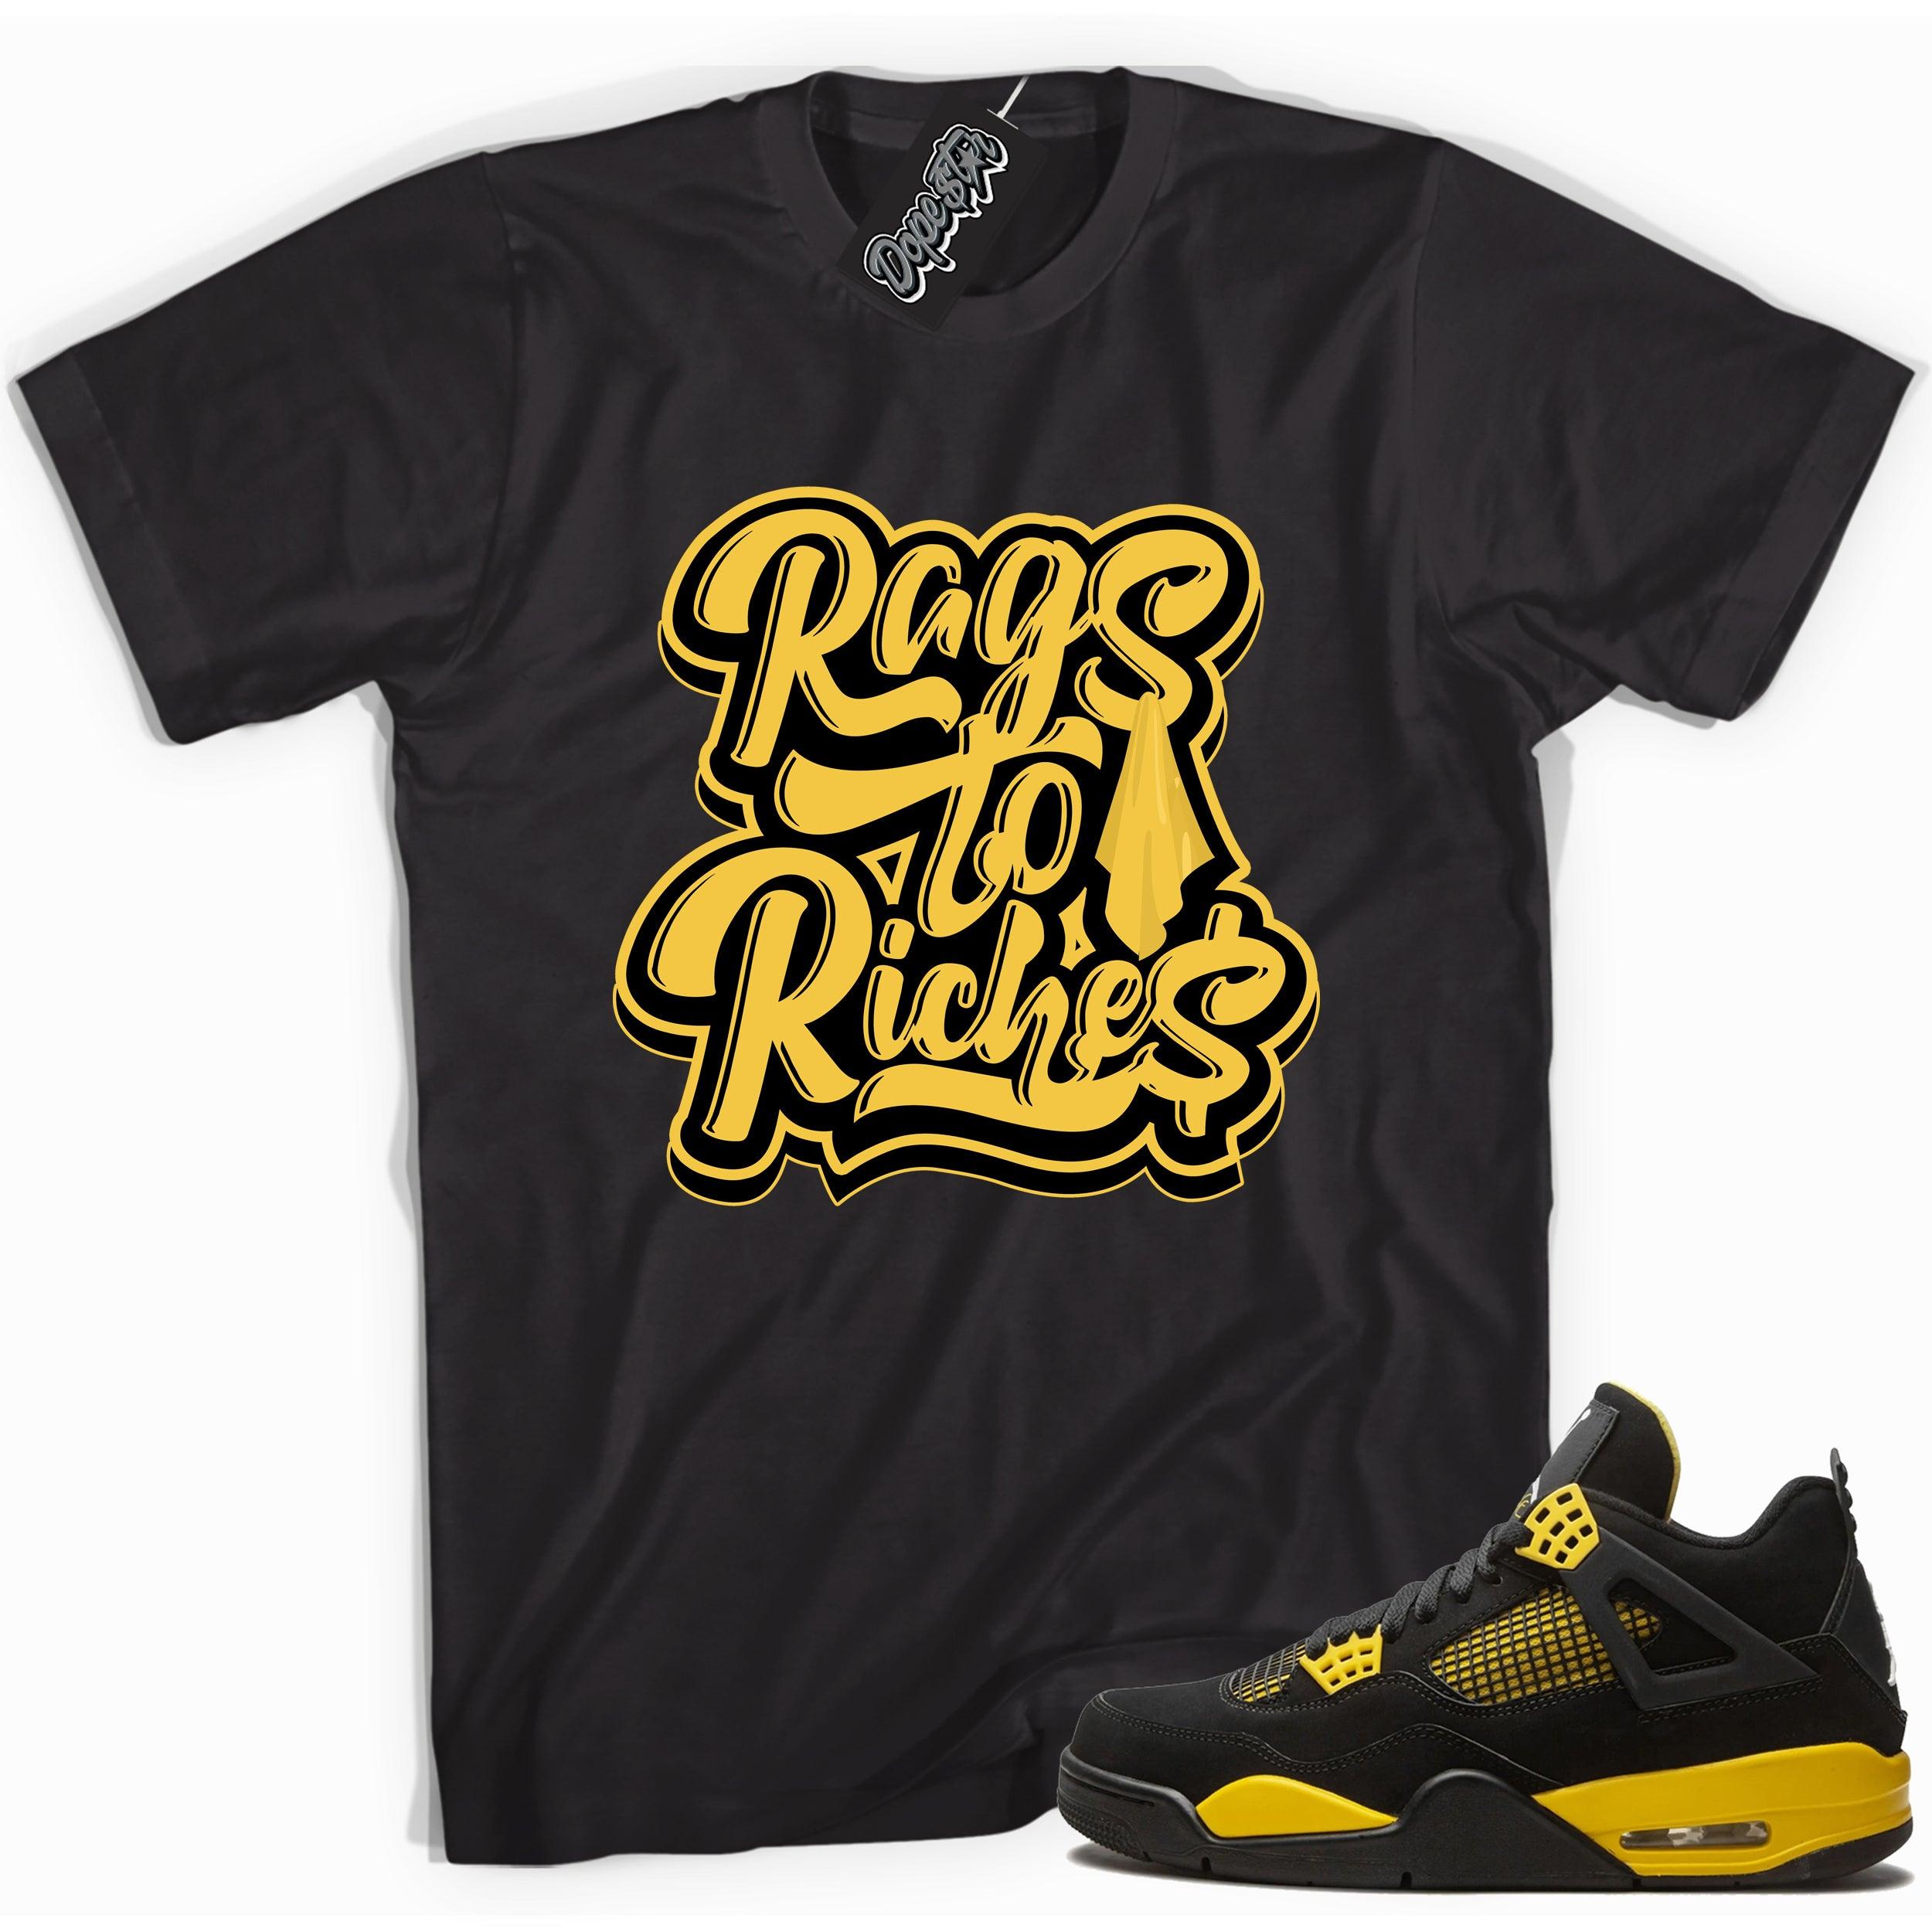 Cool black graphic tee with 'rags to riches' print, that perfectly matches  Air Jordan 4 Thunder sneakers